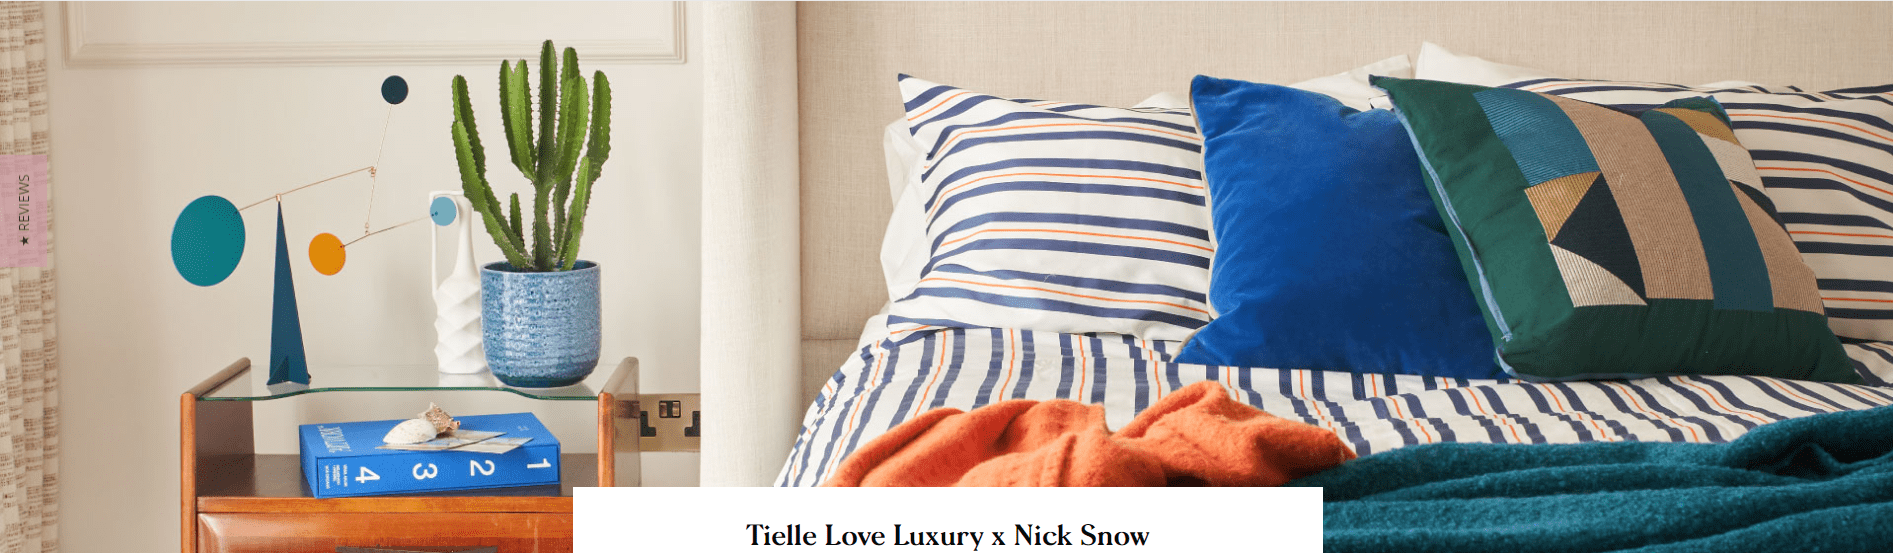 Tielle Love Luxury Launches California-Inspired Bed Linen Colour Collection